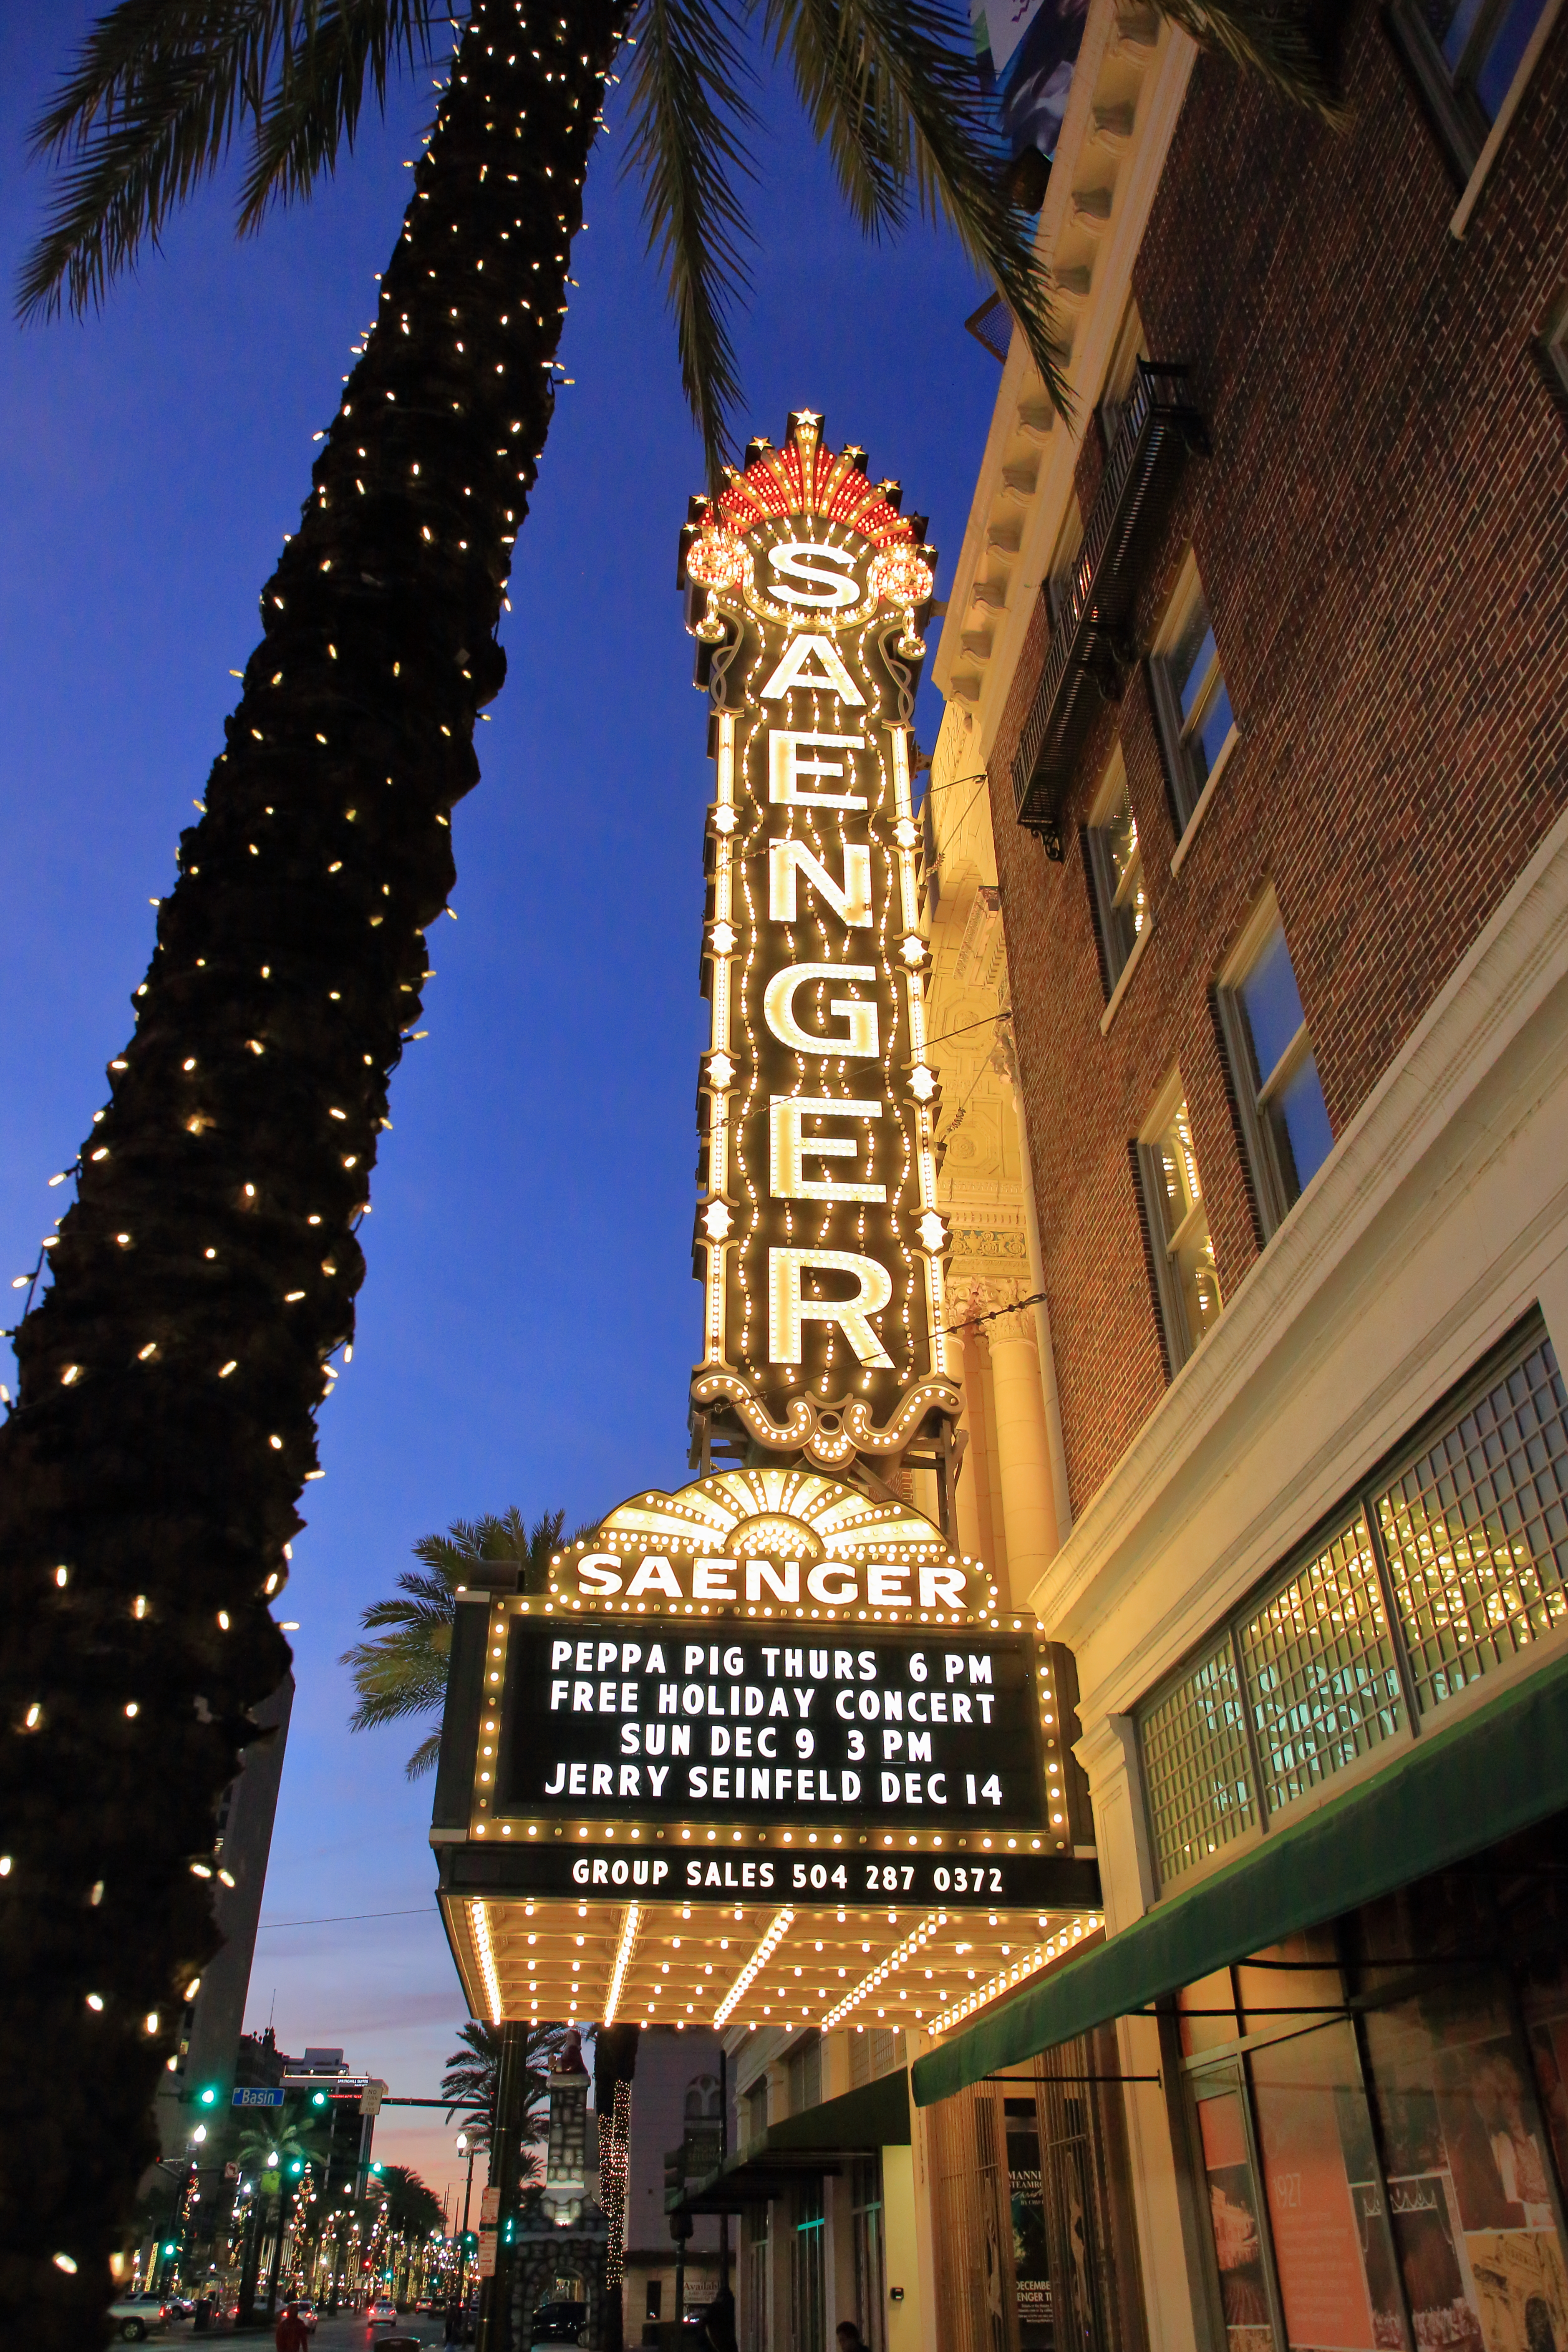 Saenger Theater on Canal Street in New Orleans, Louisiana, on December 3, 2018.